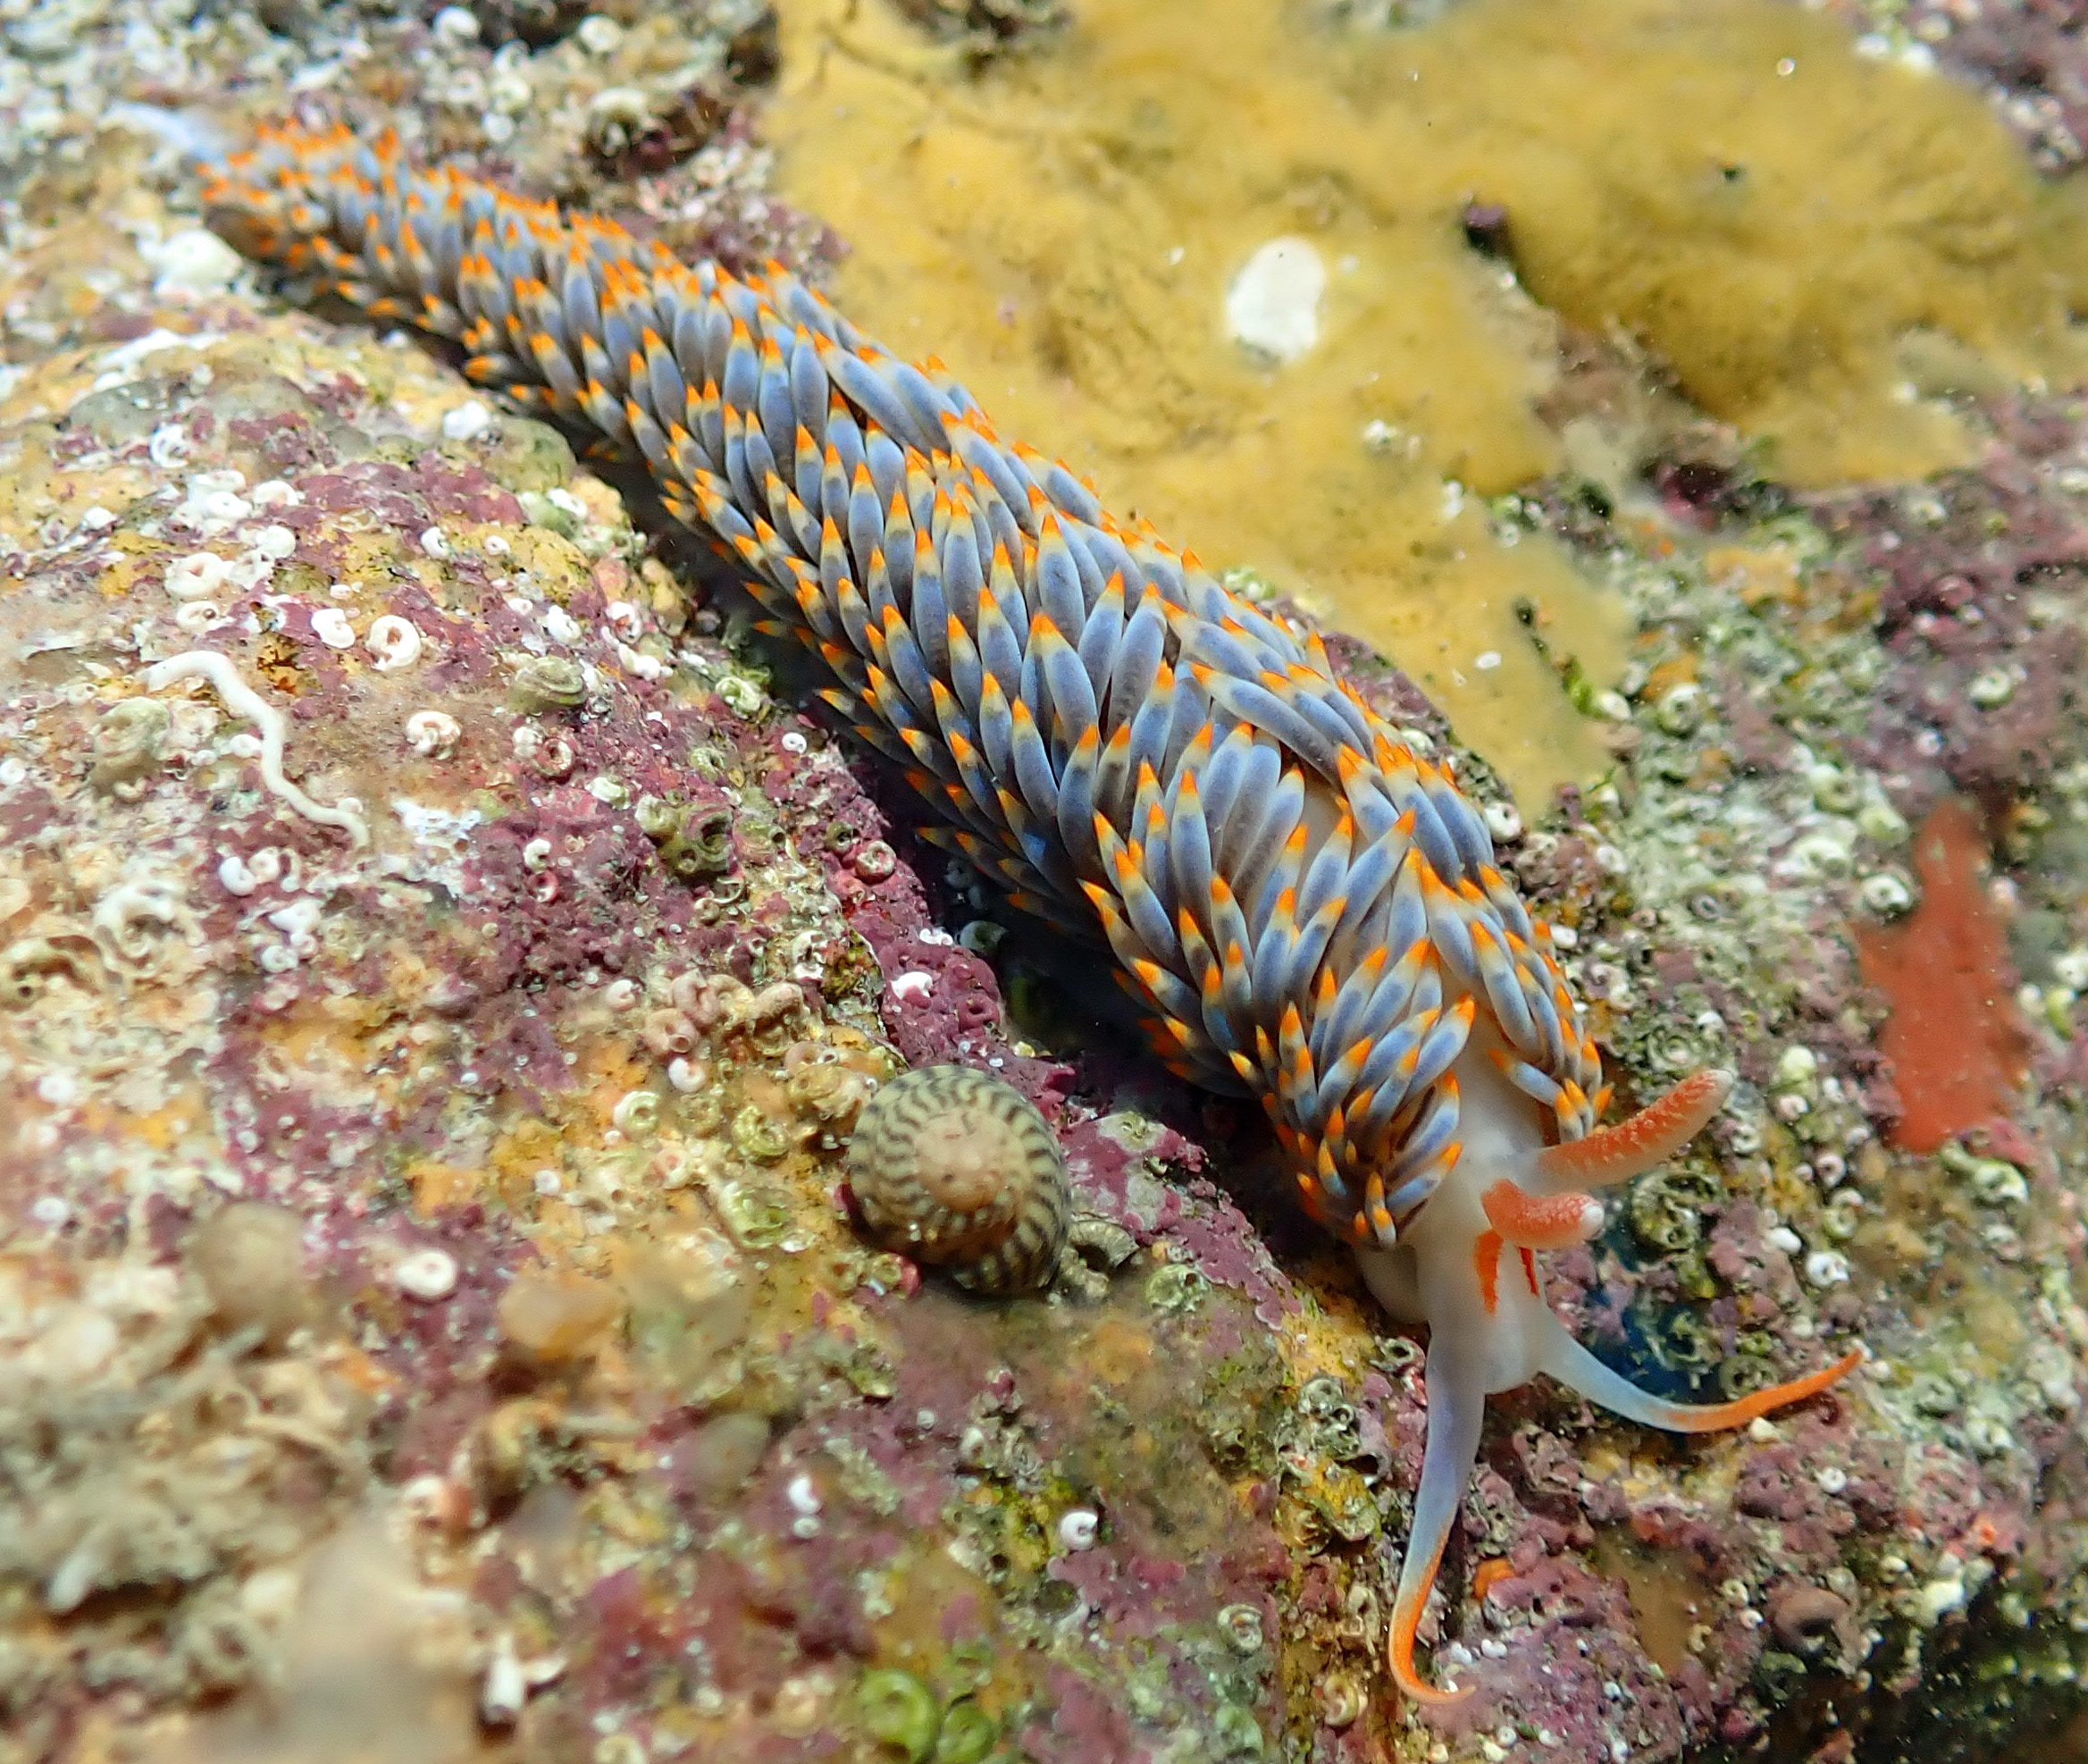 First Sighting in British Isles of Nudibranch Species